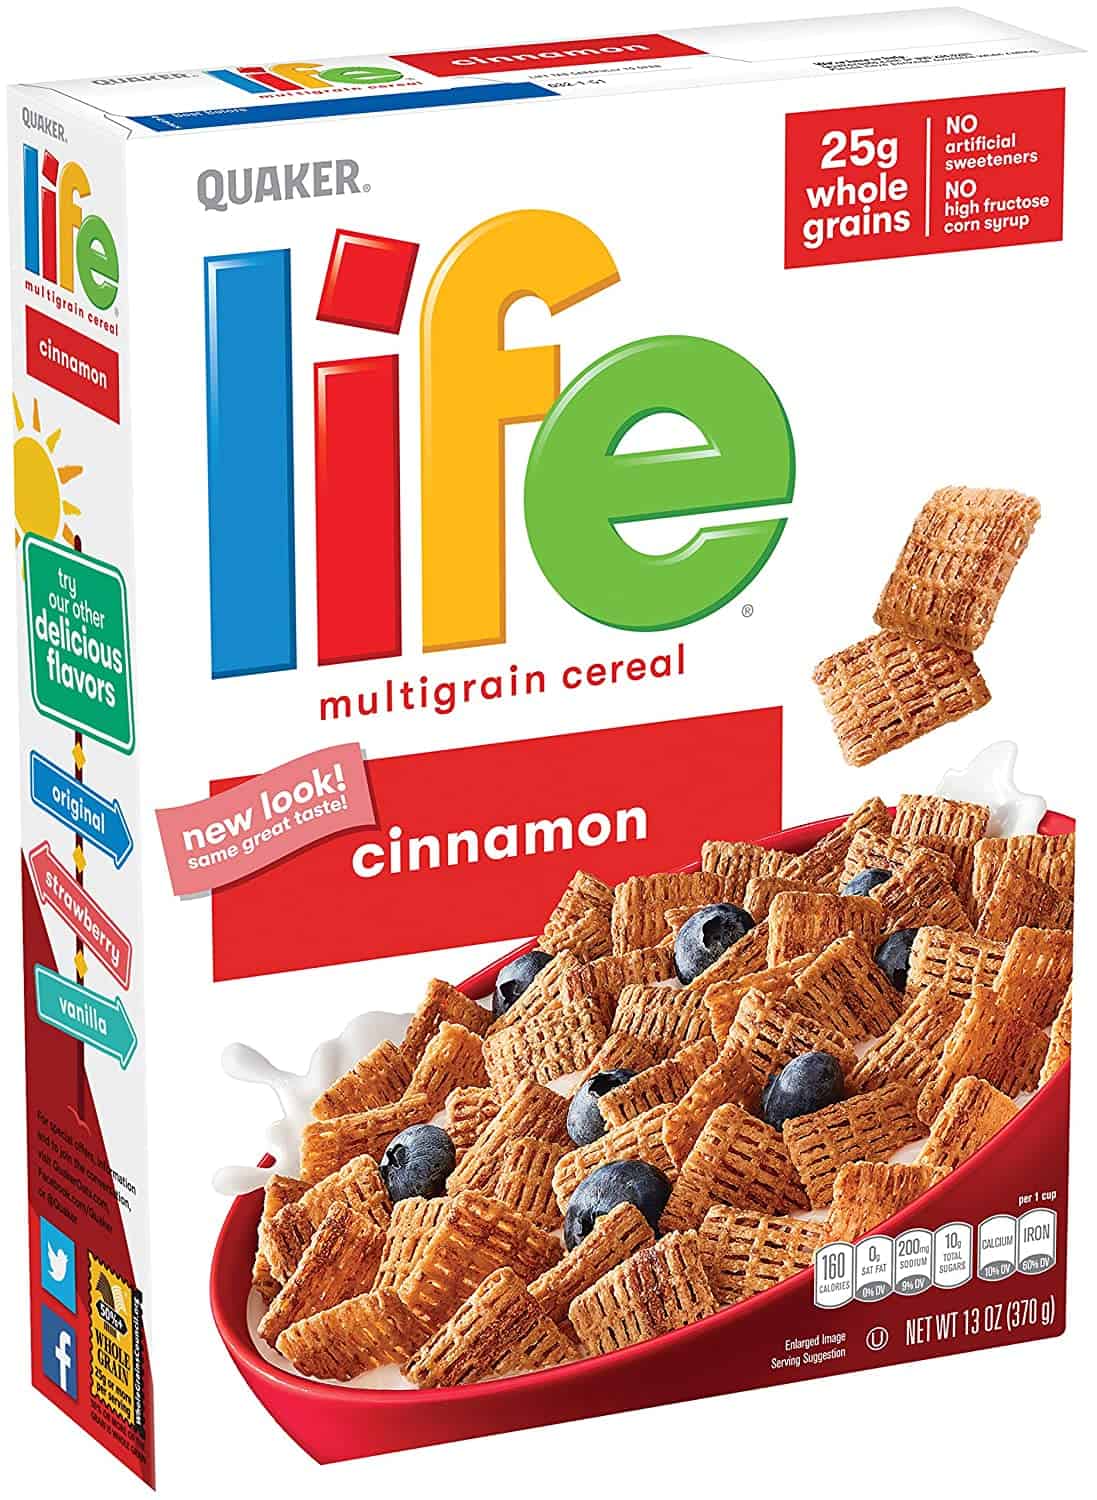 Life Breakfast Cereal, Cinnamon, 13oz Boxes (3 Pack) ONLY $5.87 – Amazon Prime Deal